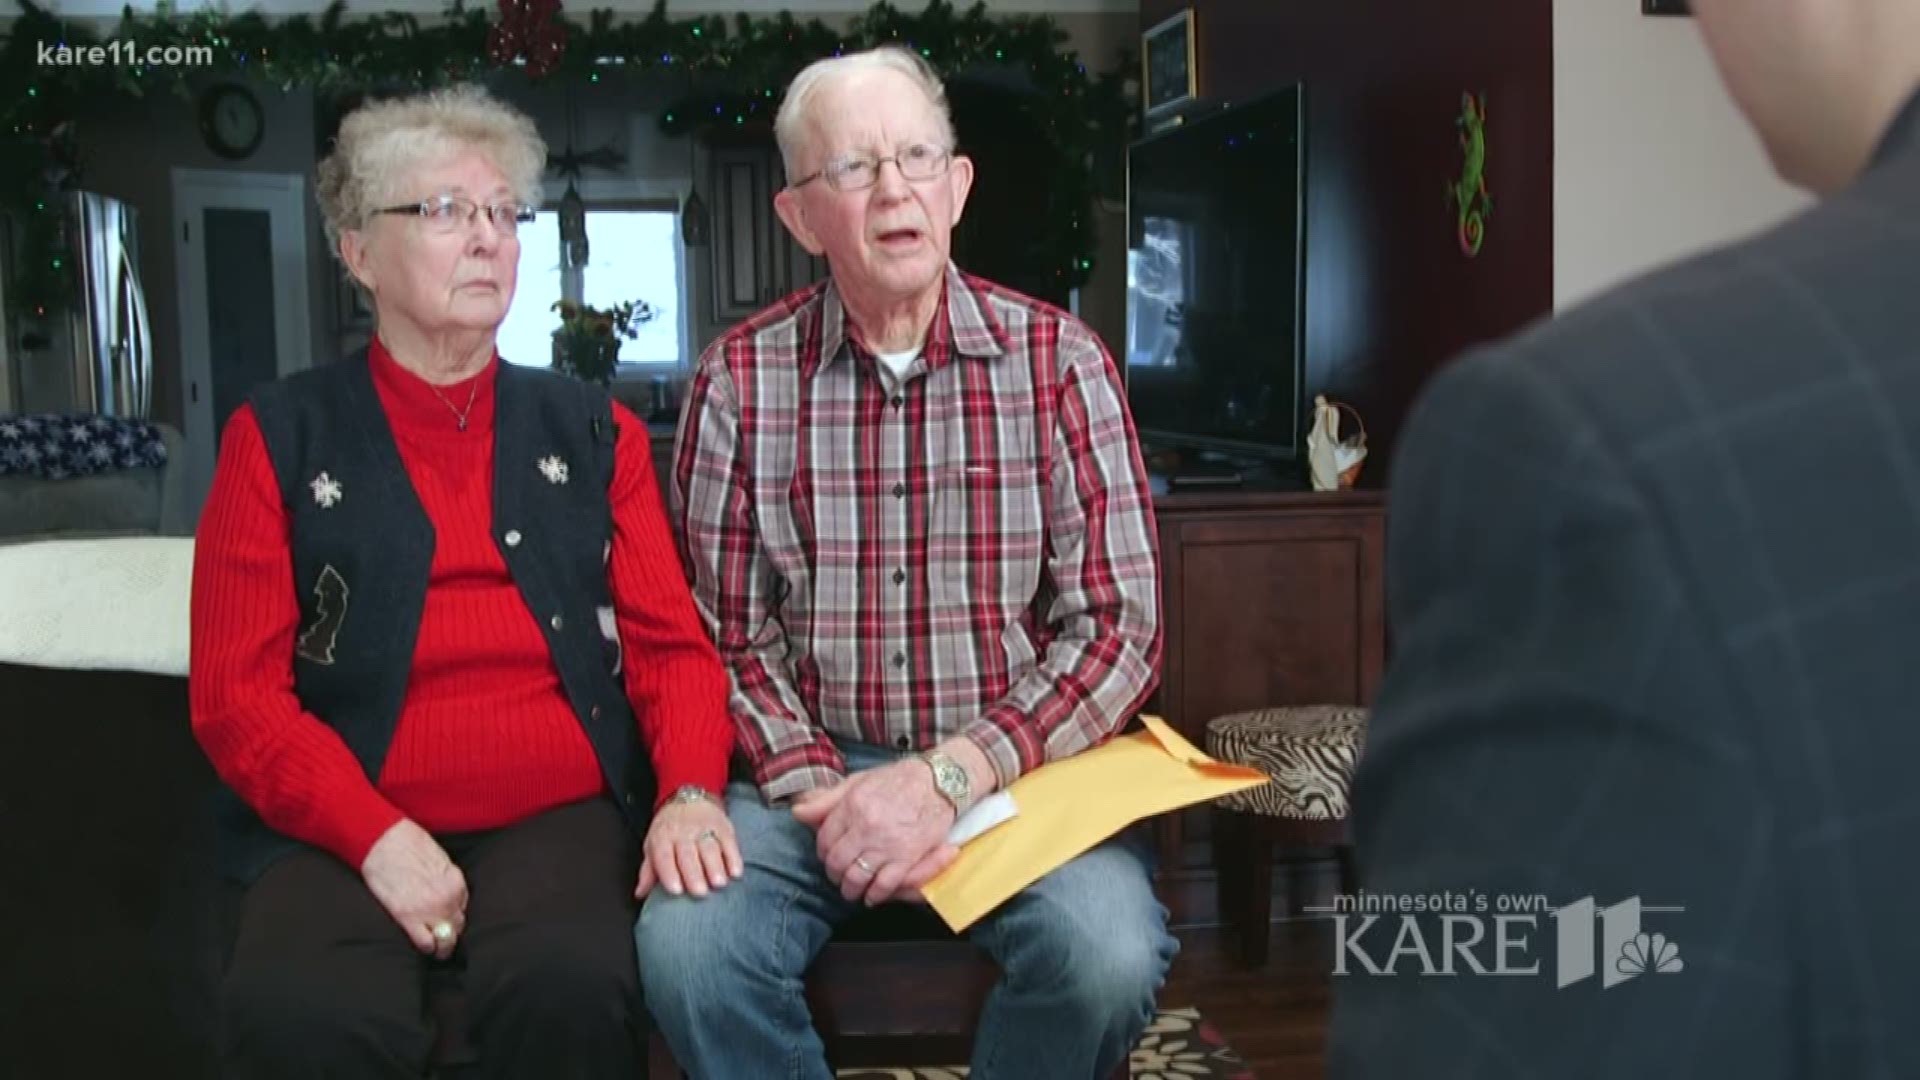 MN couple warning others after being scammed out of $7,000